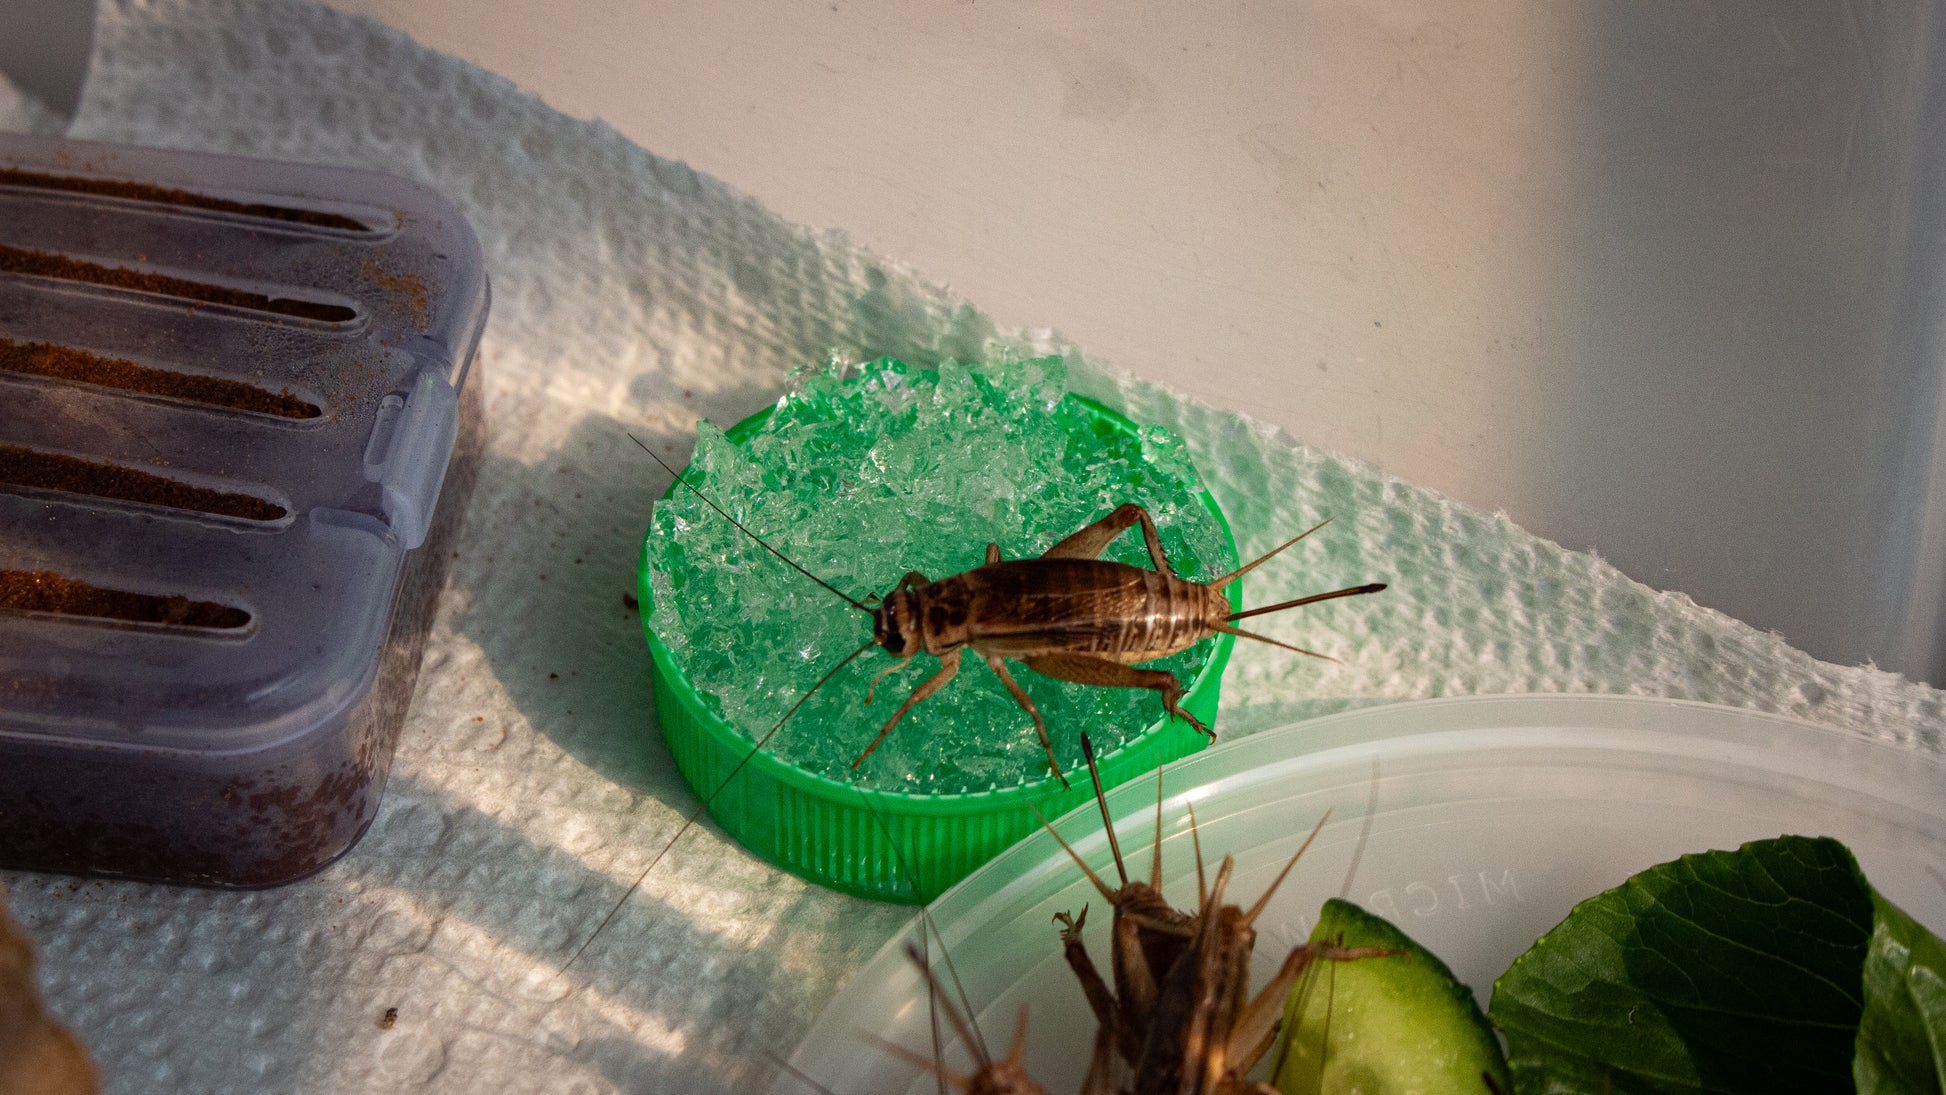 Cricket drinking from container of water crystals